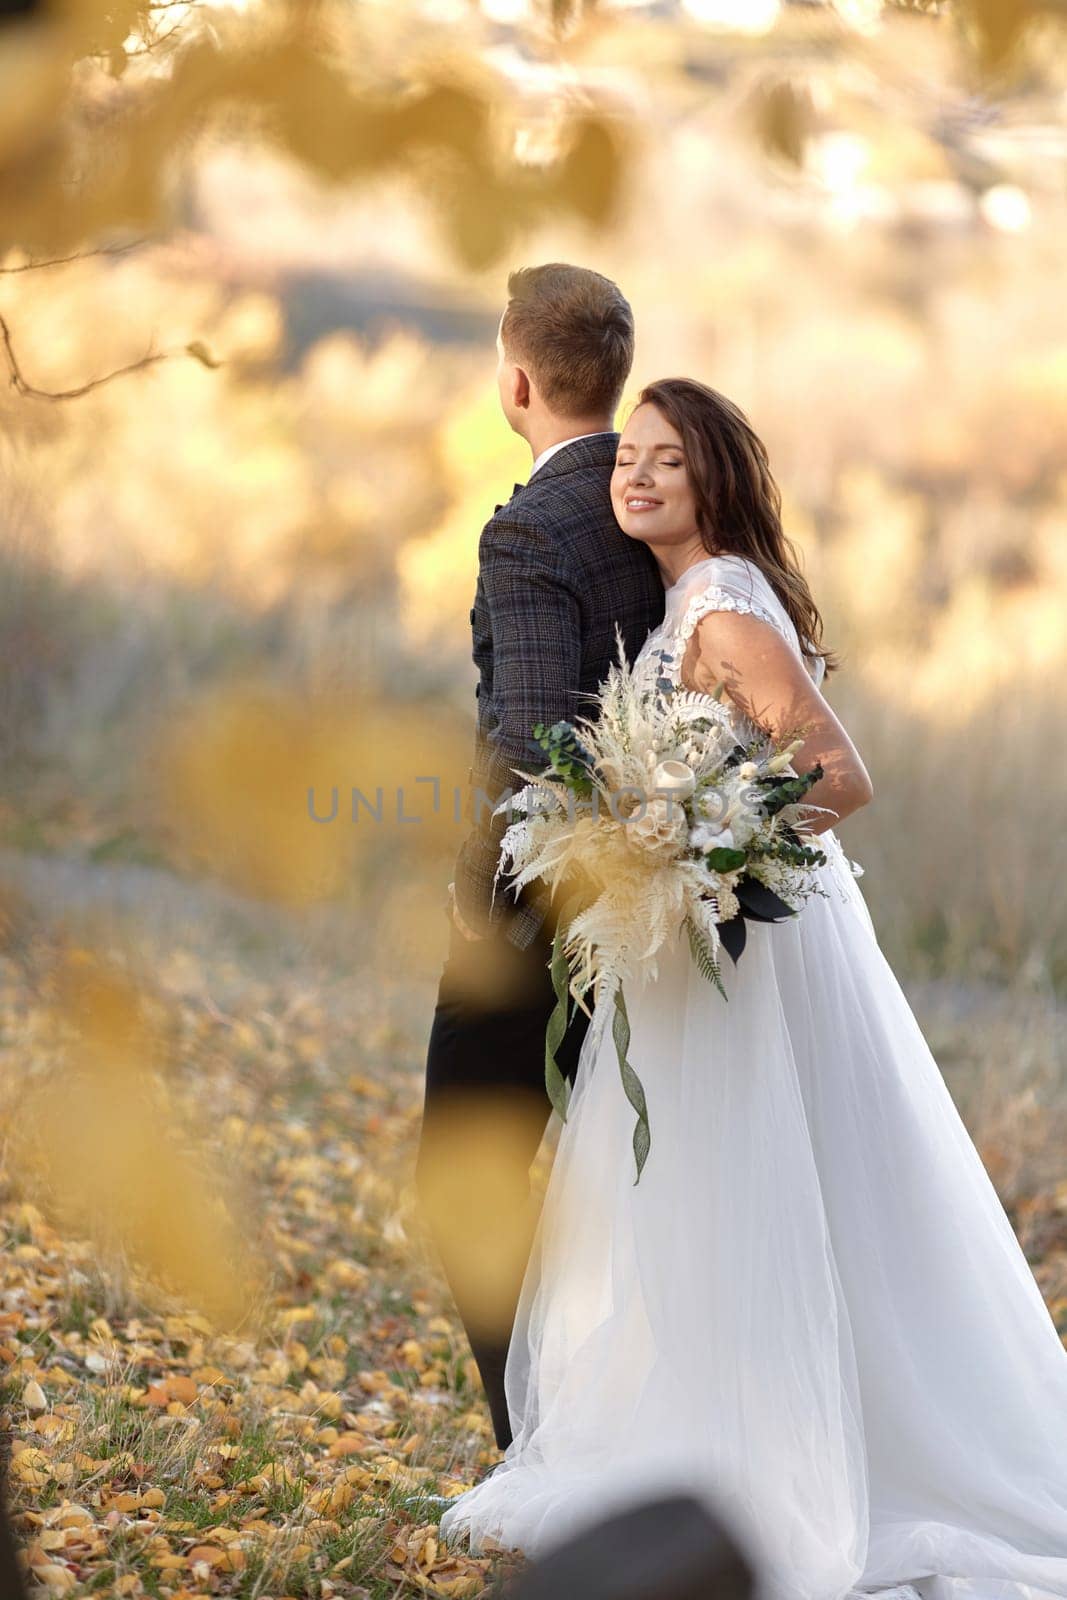 beautiful sensual bride in white wedding dress holding bouquet and embracing groom outdoor on natural background